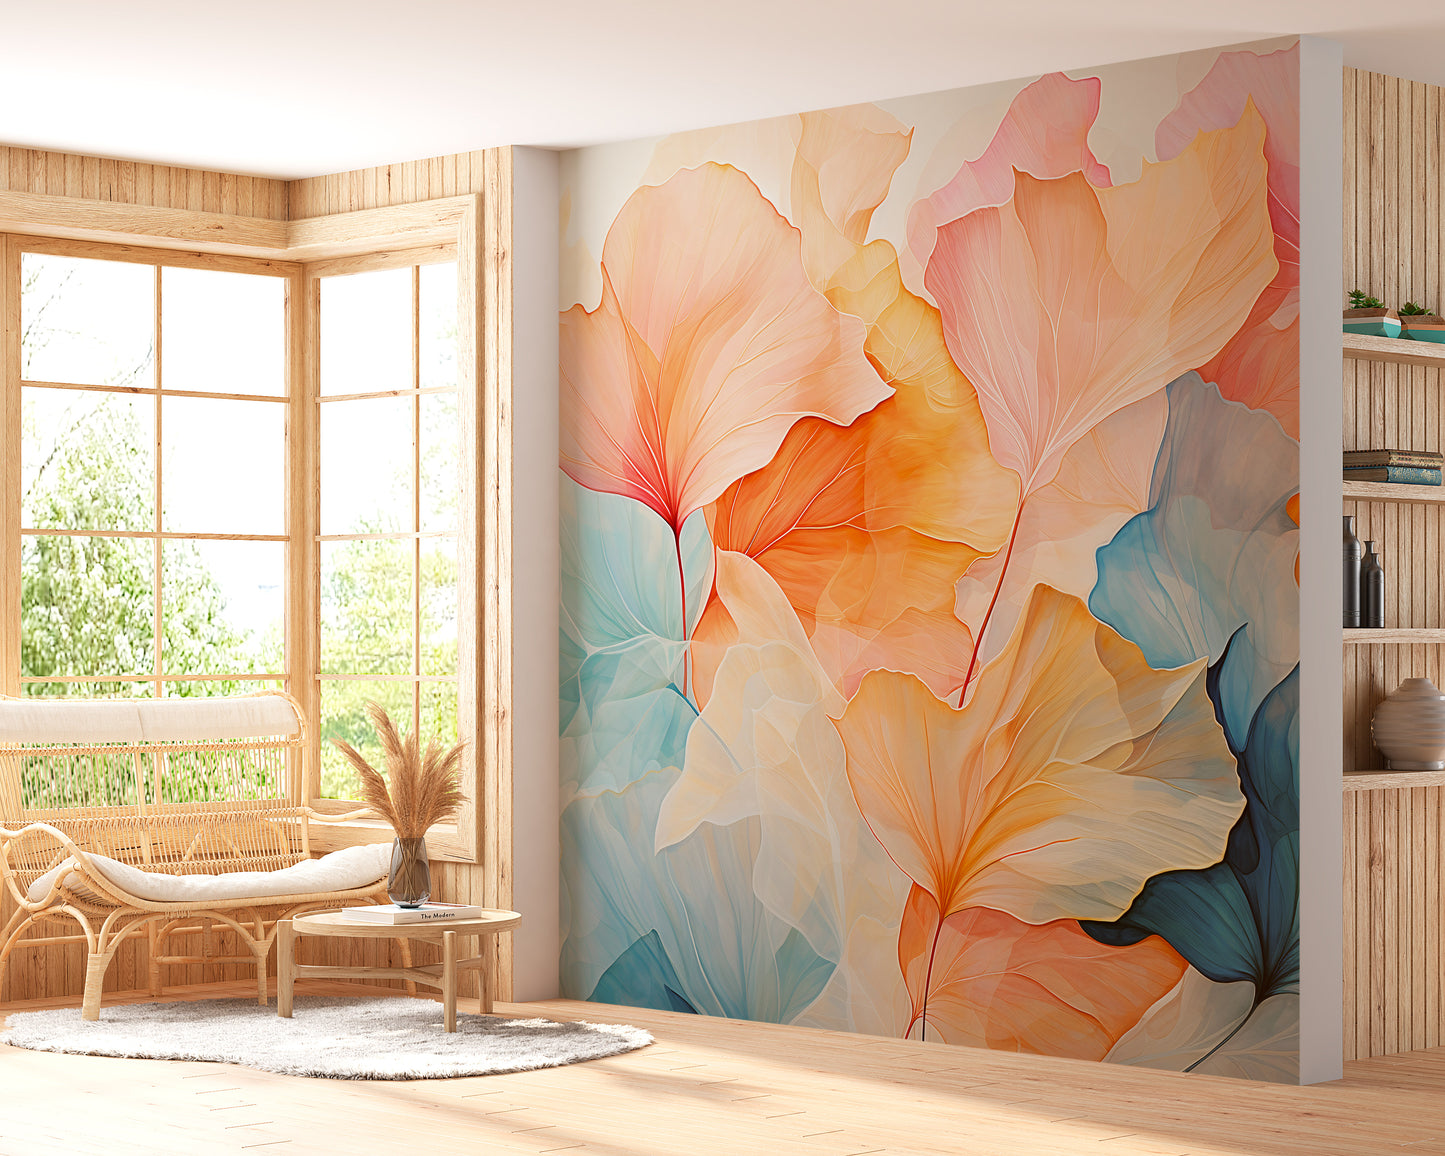 Unique Wall Decor: Orange Abstract Flowers Mural